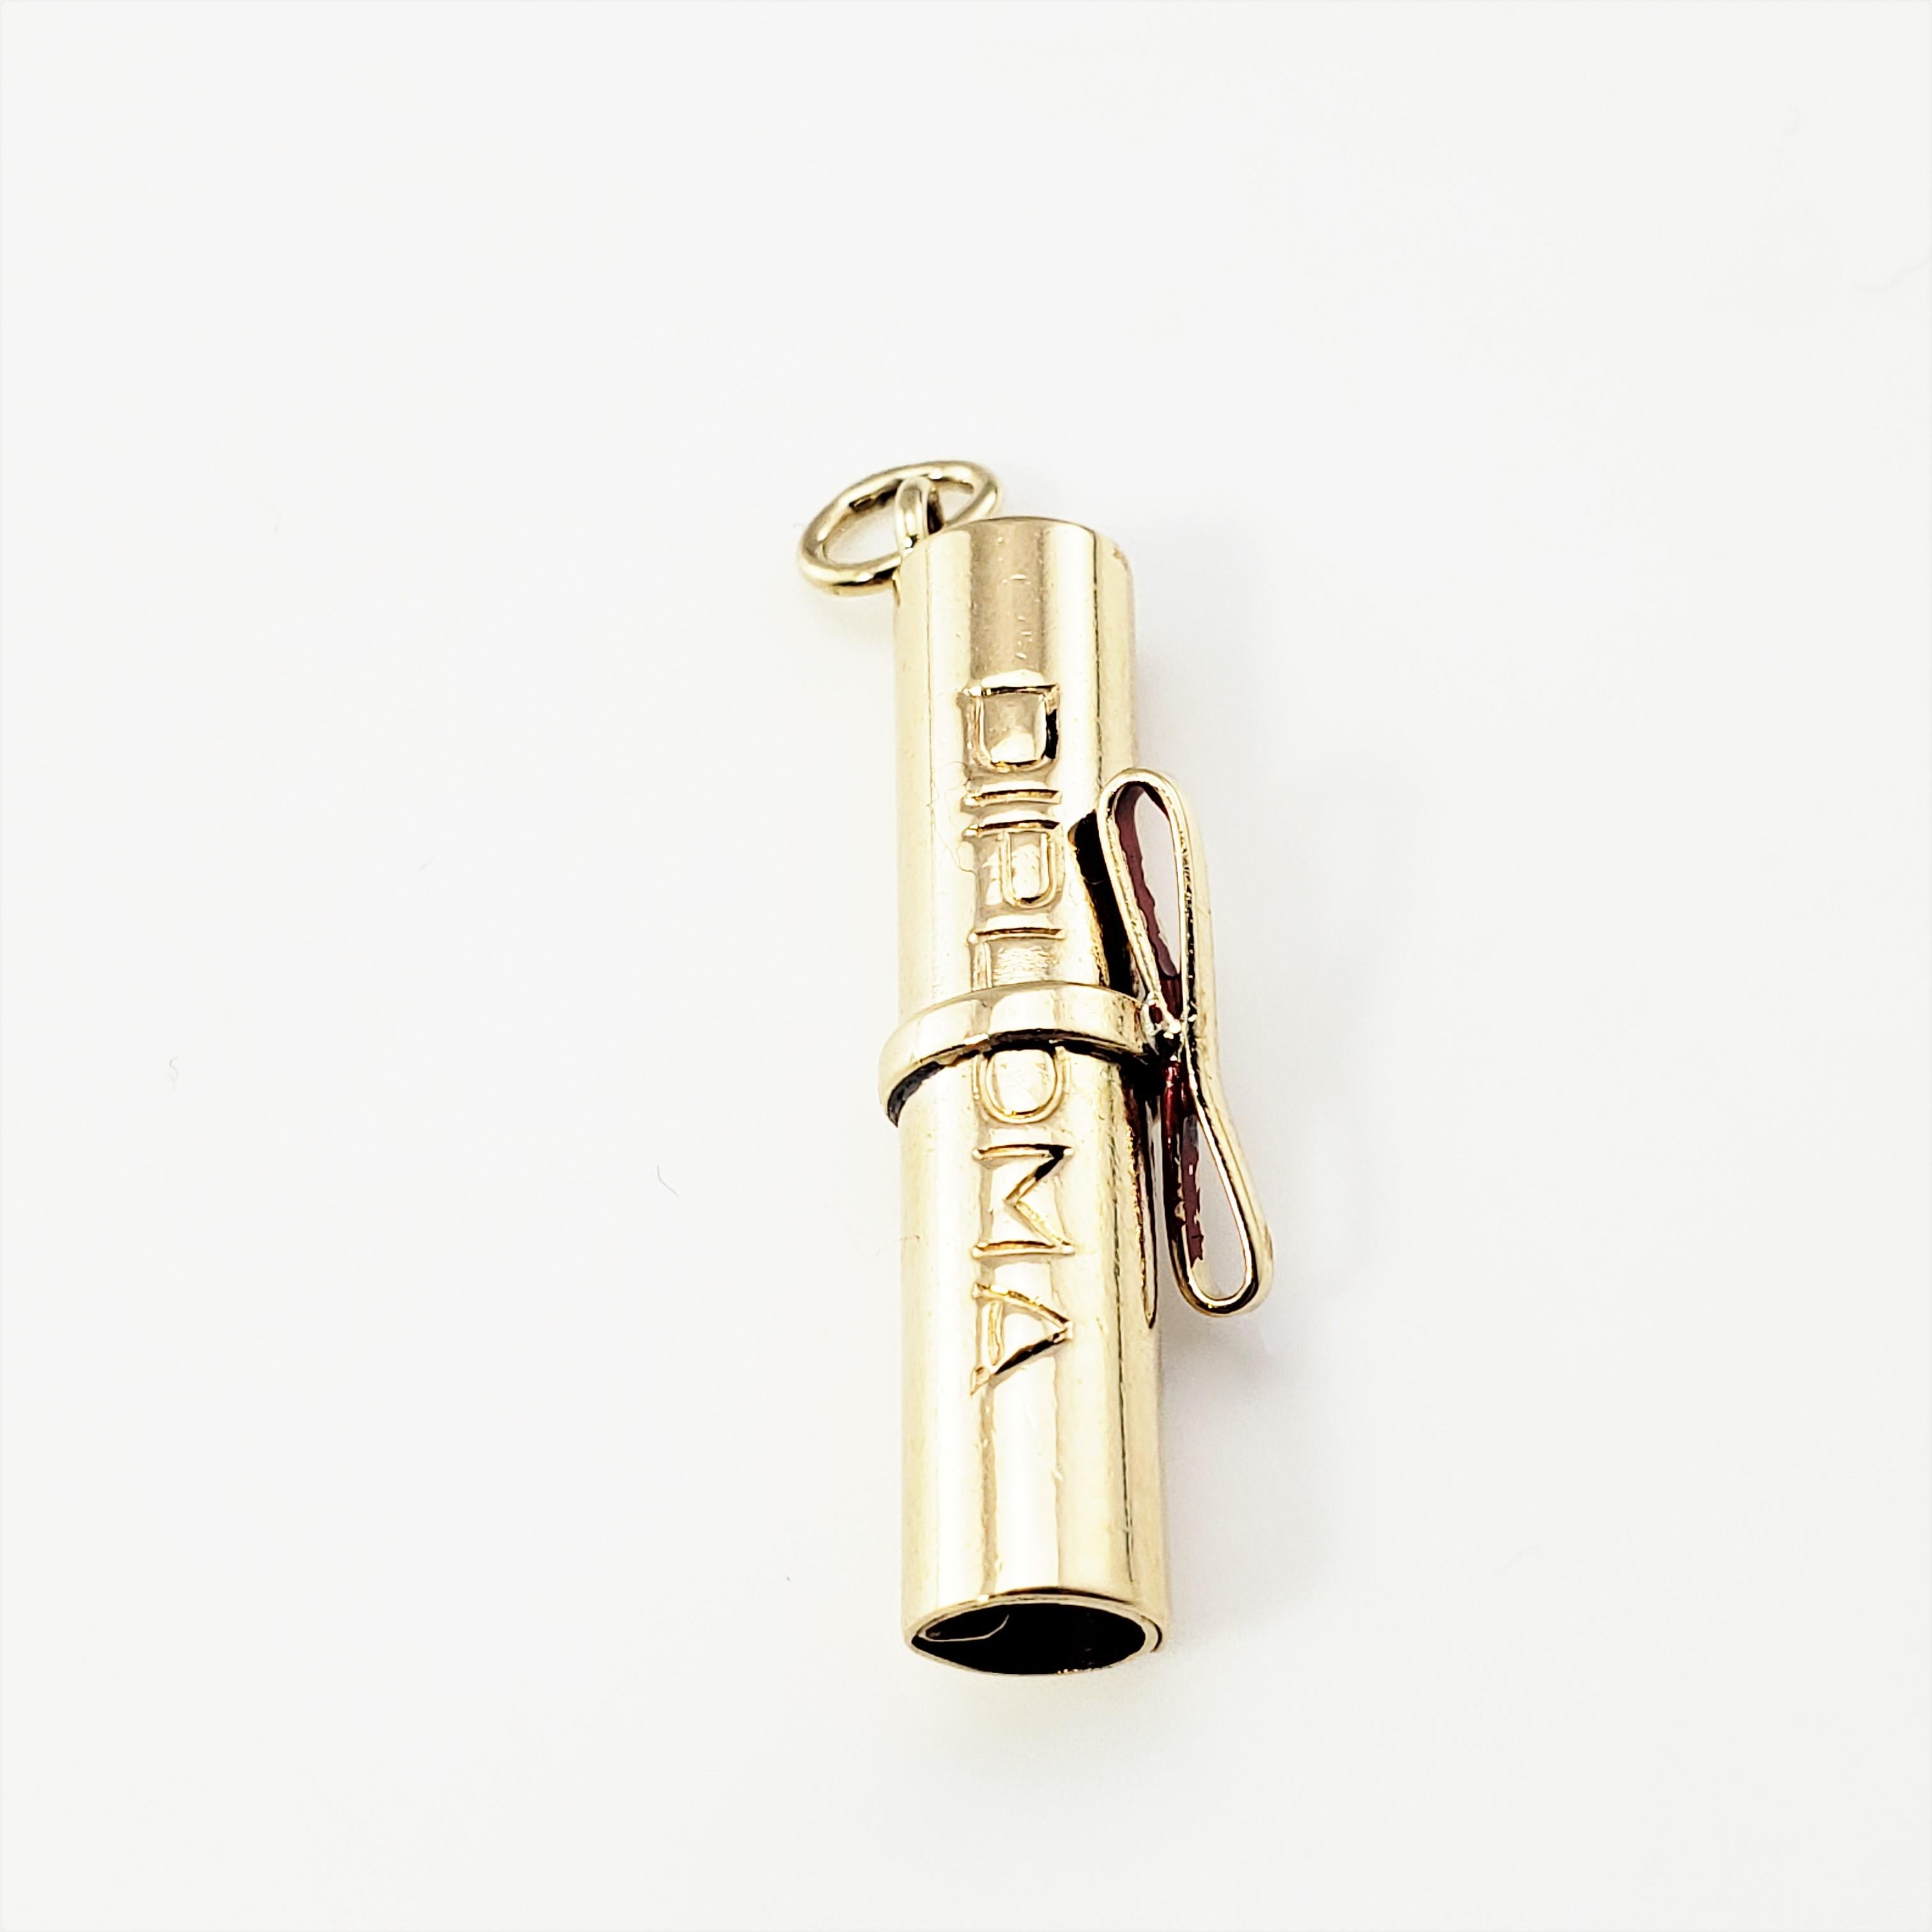 14 Karat Yellow Gold Diploma Charm-

Celebrate the graduate!

This lovely 3D charm features a miniature diploma meticulously detailed in 14K yellow gold.

Size: 24  mm x  7 mm

Weight: 1.5 dwt. /2.4  gr.

Stamped: 14K

* Chain not included

Very